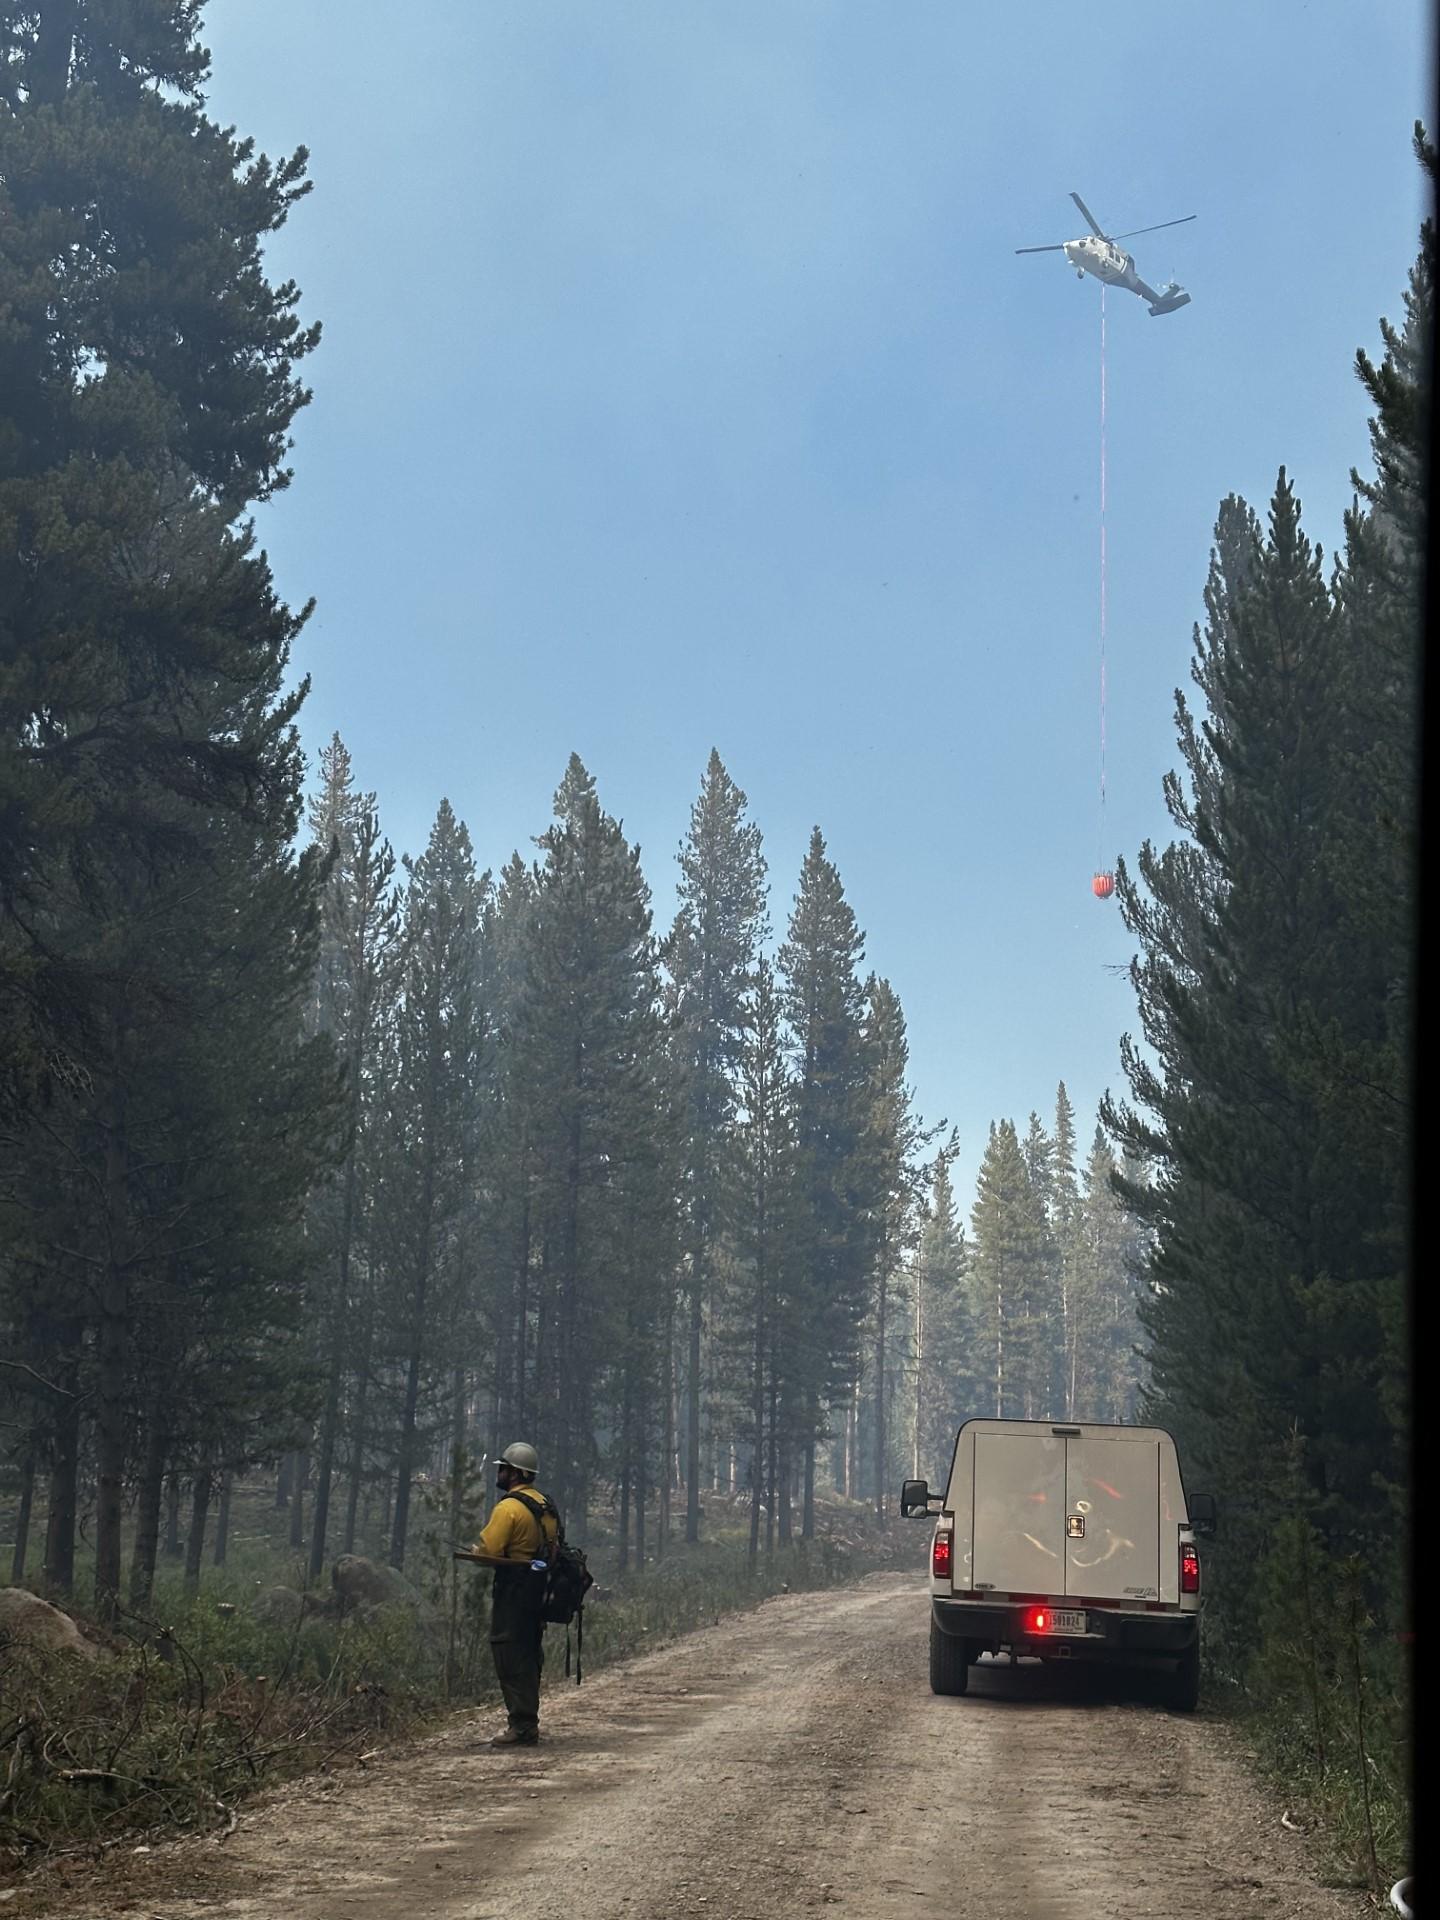 Helicopter operations occurring on the Boales Creek Fire